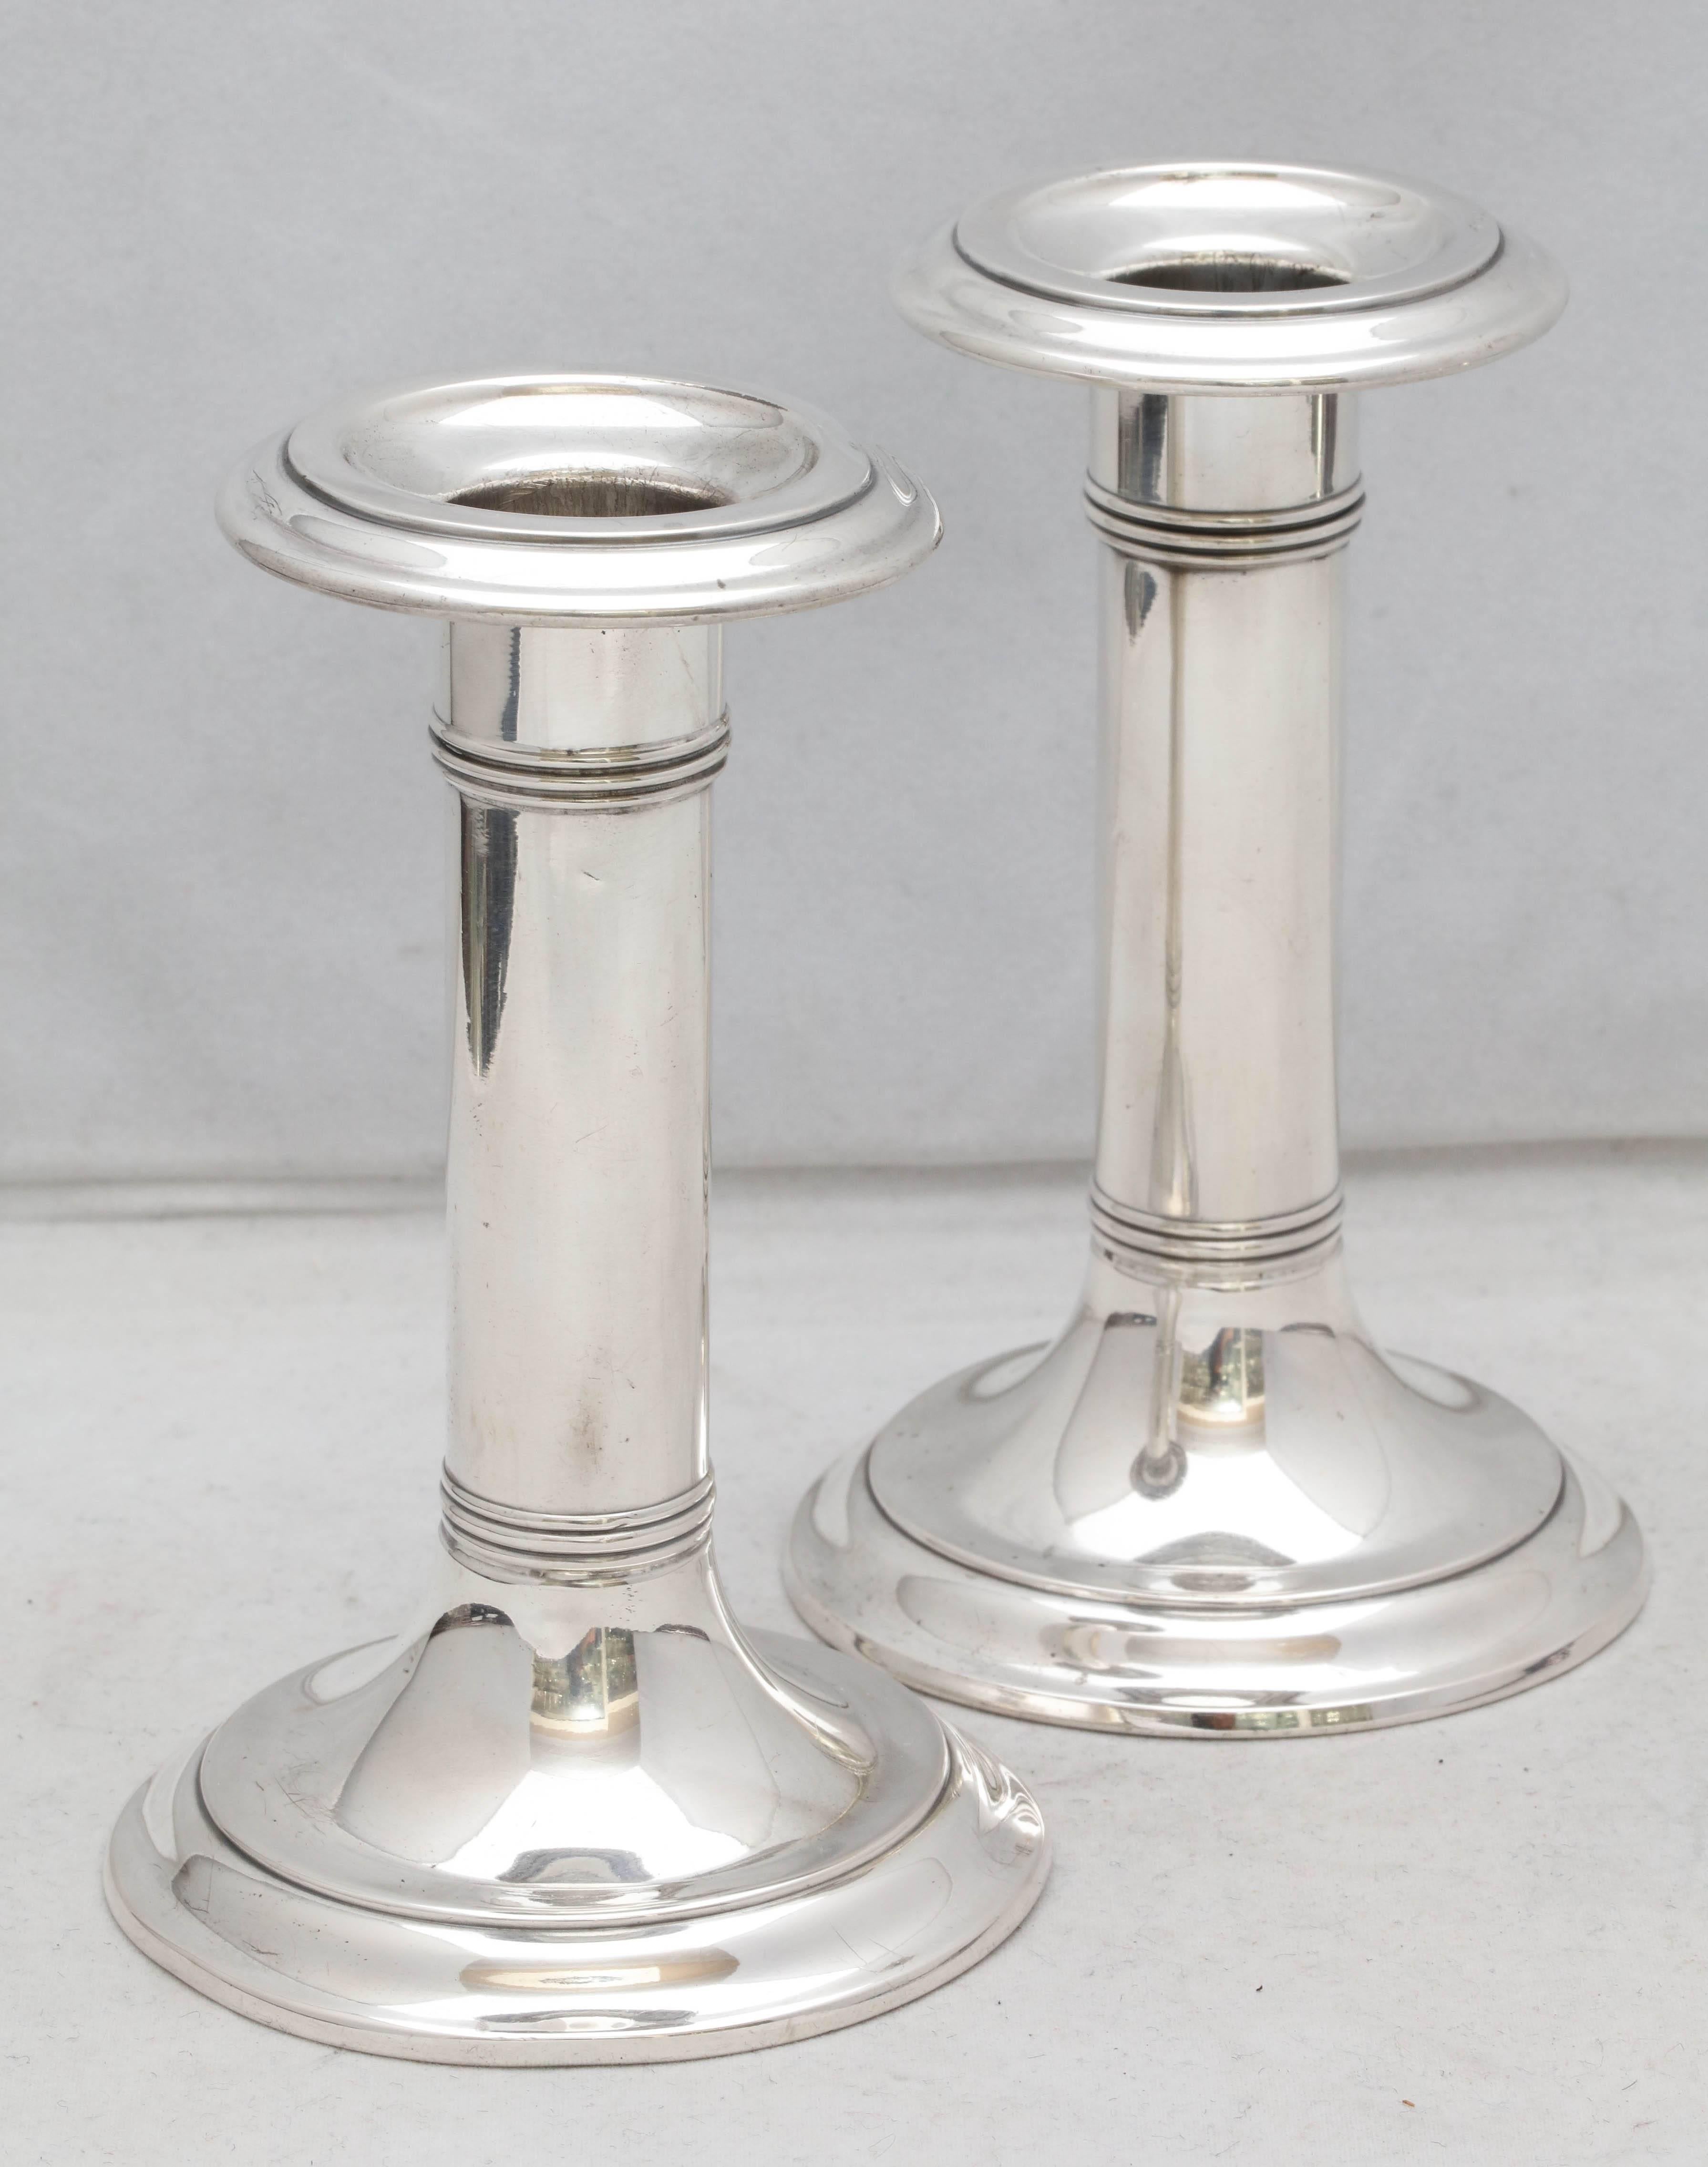 Pair of sterling silver, Edwardian candlesticks, The Gorham Mfg. Co., Providence, Rhode Island, circa 1905. Measure: 5 1/4 inches high x 3 1/4 inches diameter across base. Weighted column. Dark spots in photos are reflections. Excellent condition.